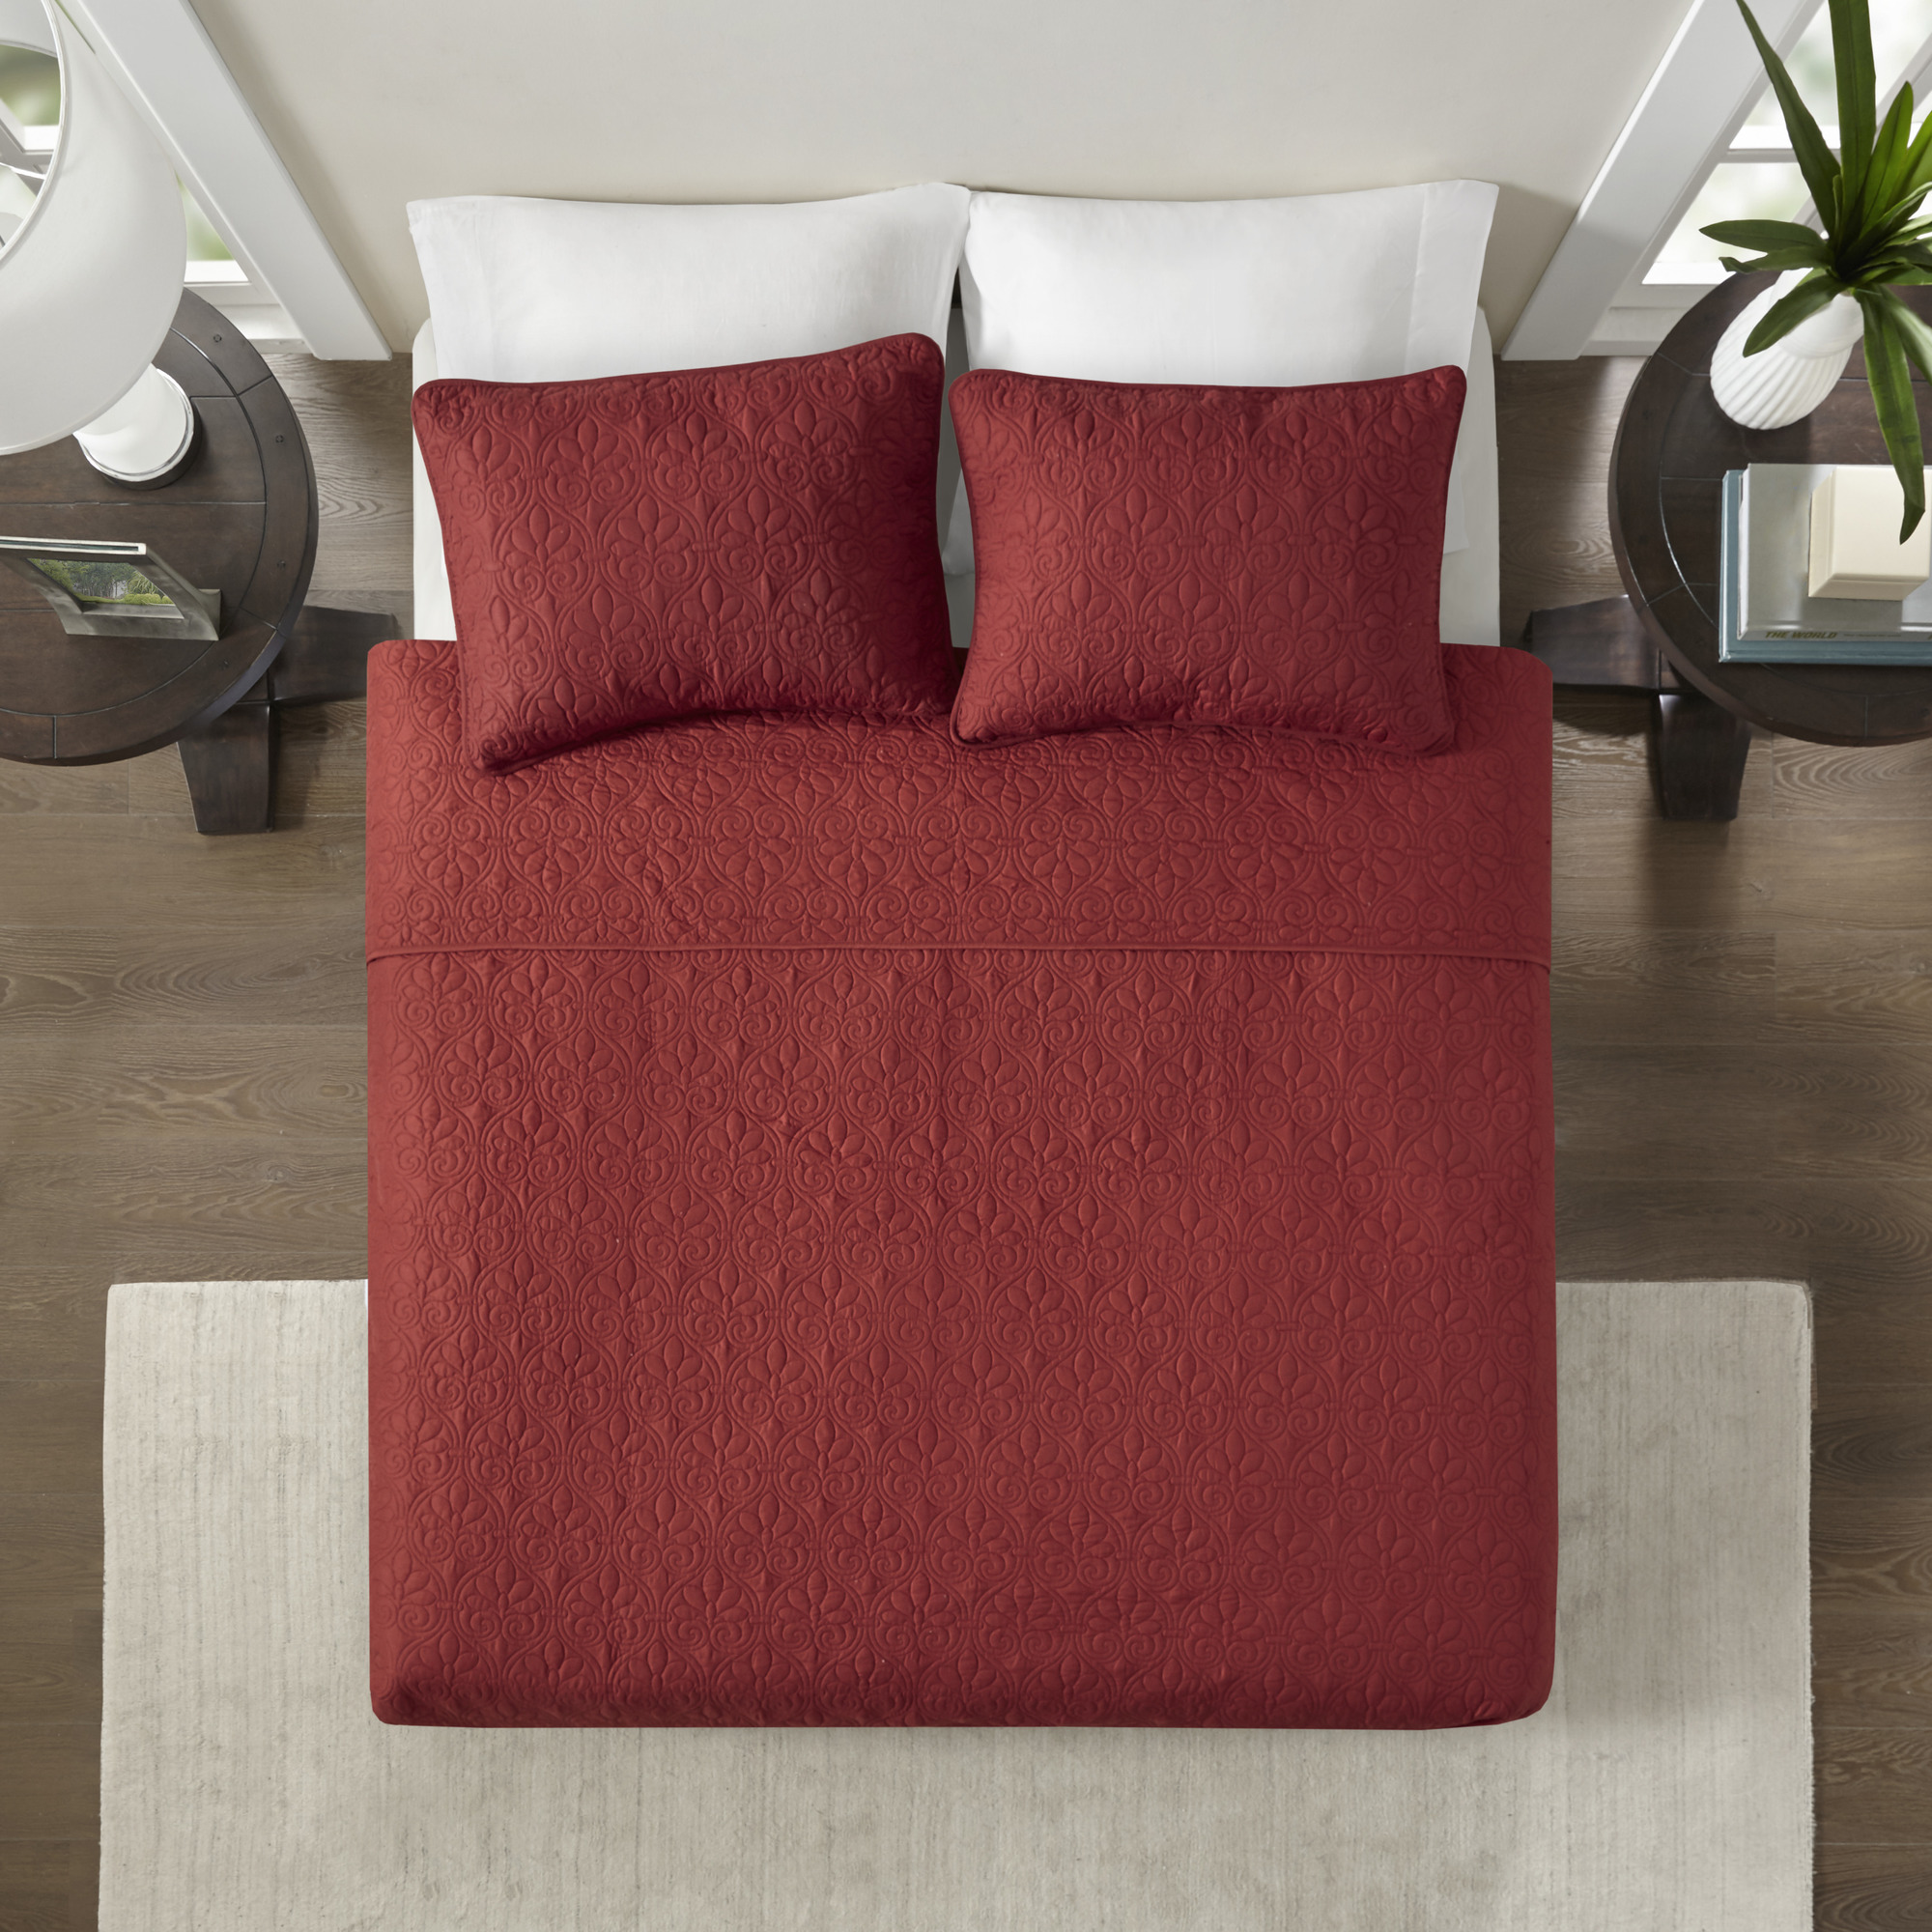 Home Essence Vancouver Super Soft Reversible Coverlet Set, Full/Queen, Red - image 5 of 13